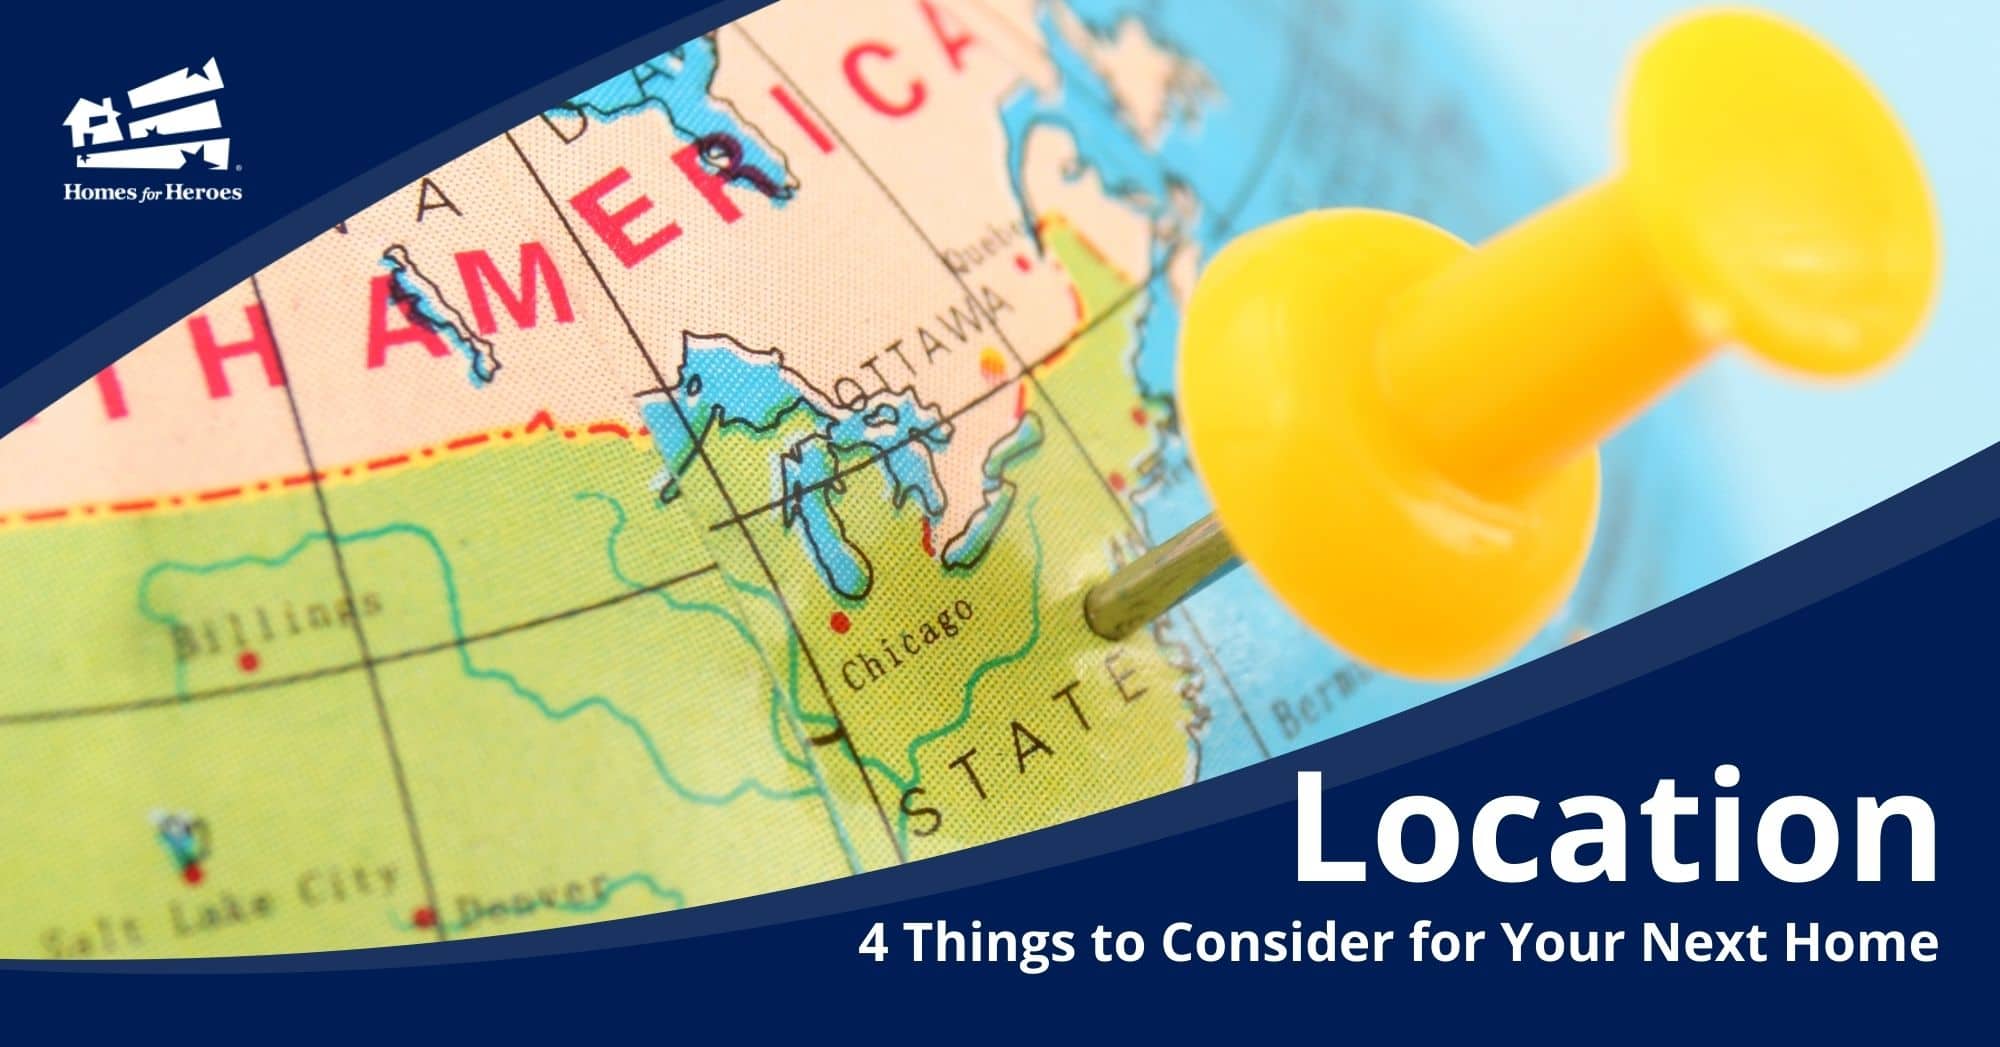 globe map united states yellow stick pin mark location where i should live Homes for Heroes